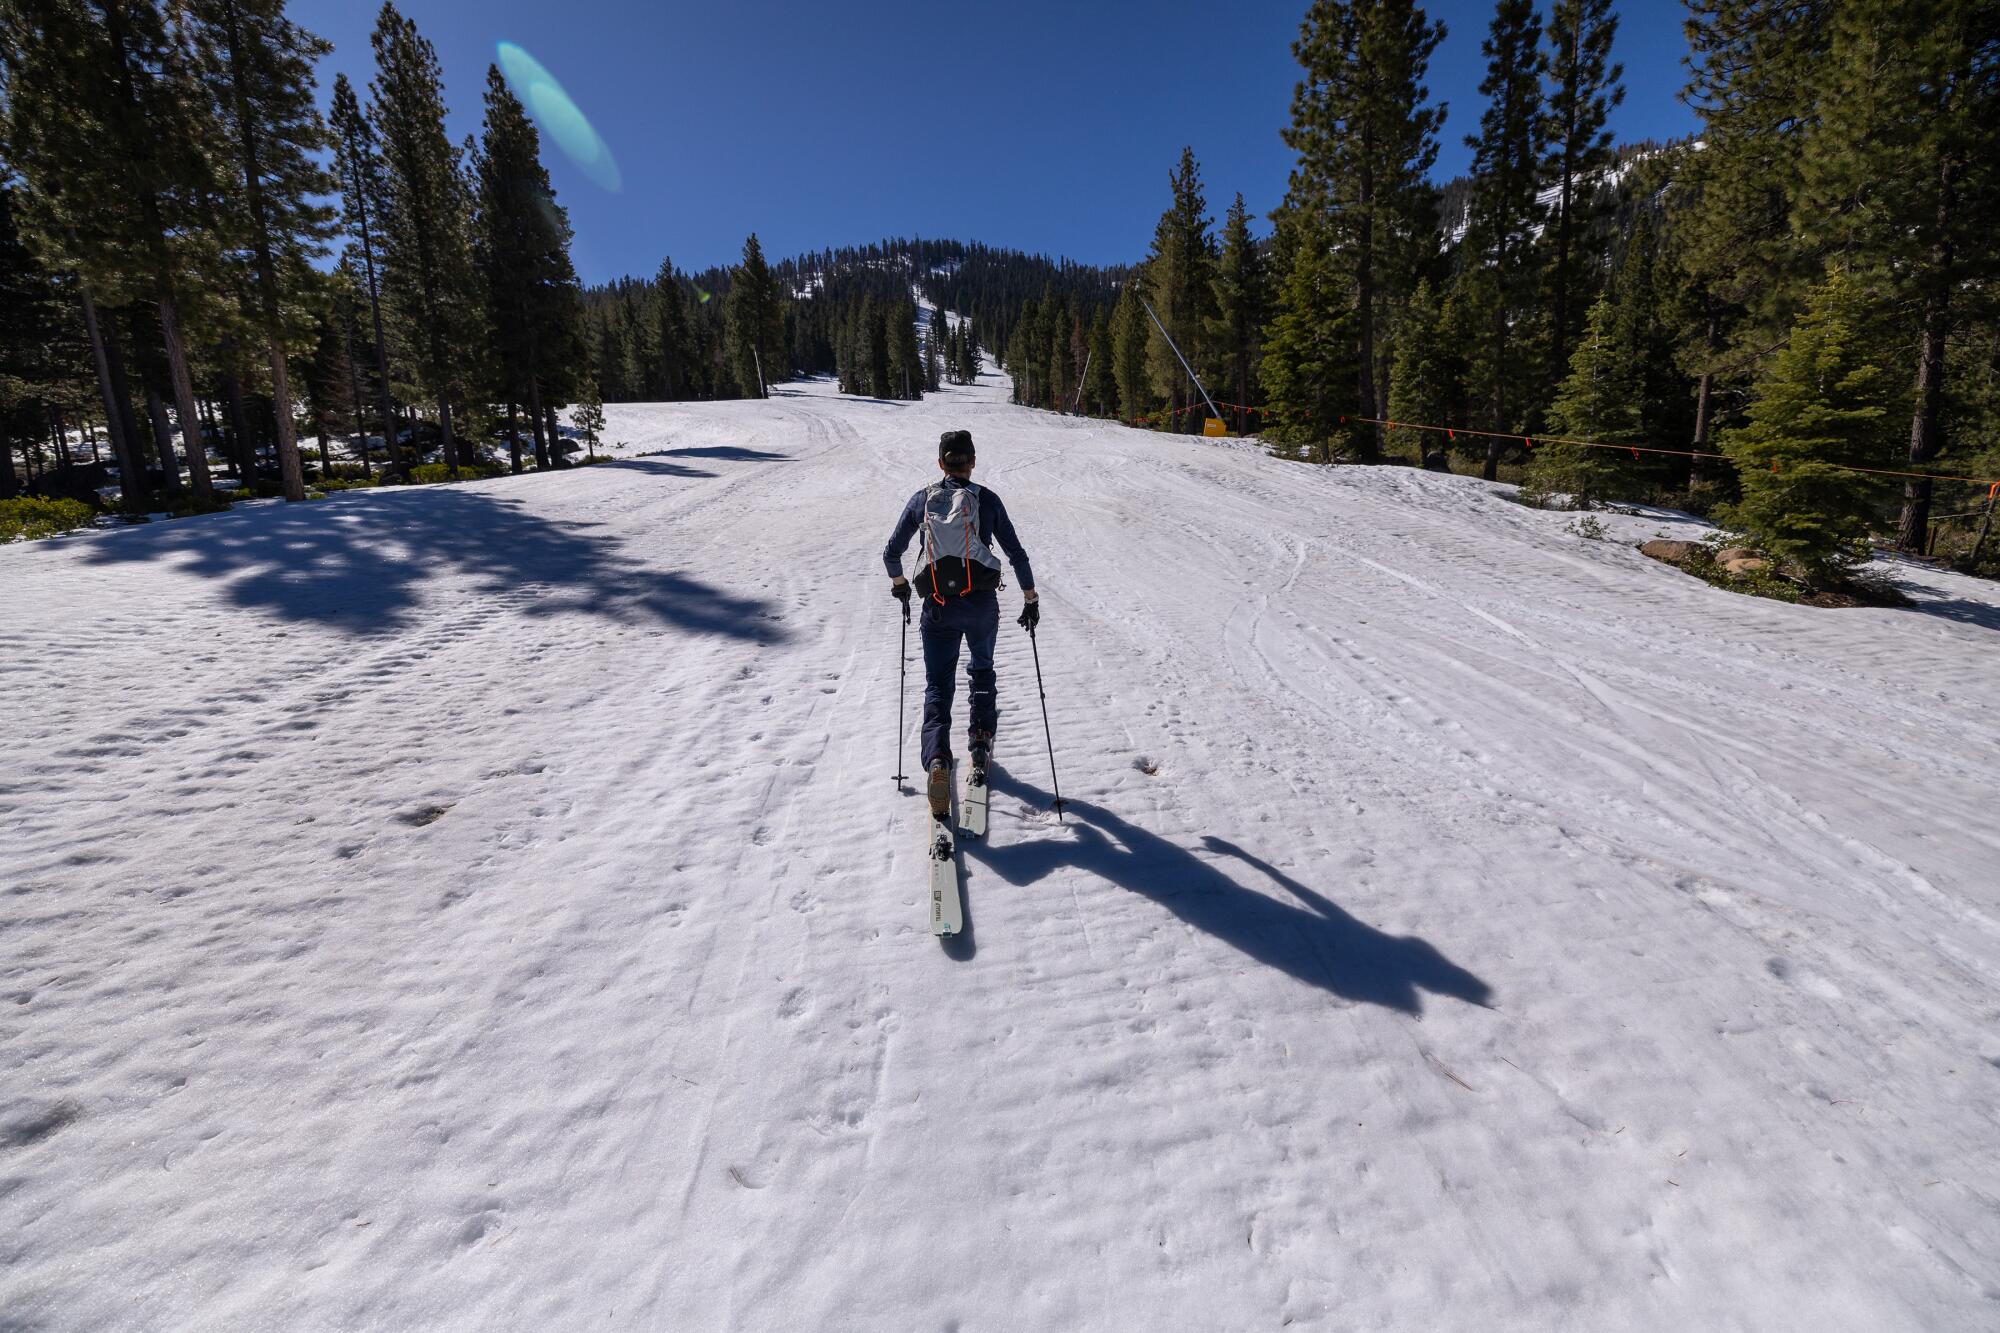 A man skis up a snowy slope.